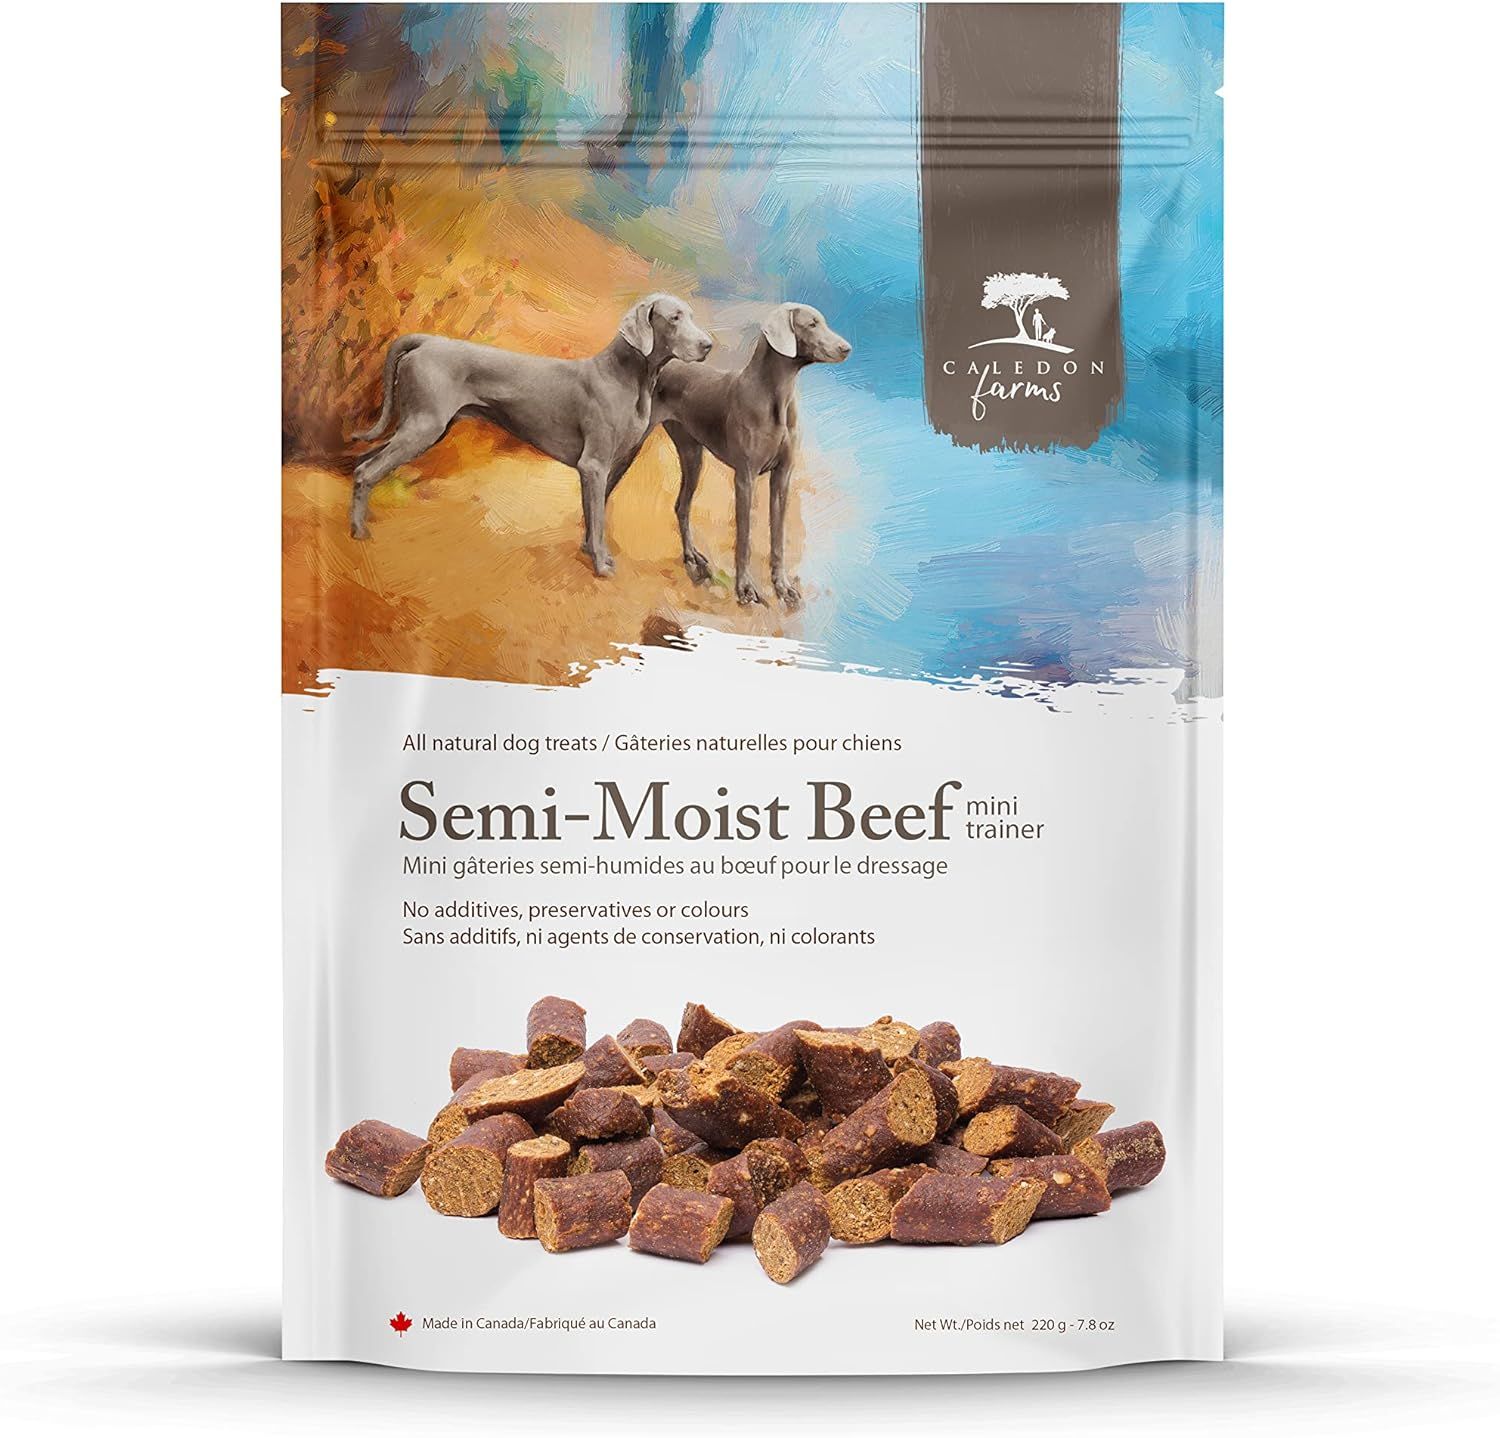 5 Best Semi-Moist Dog Treats for Training and Snacking